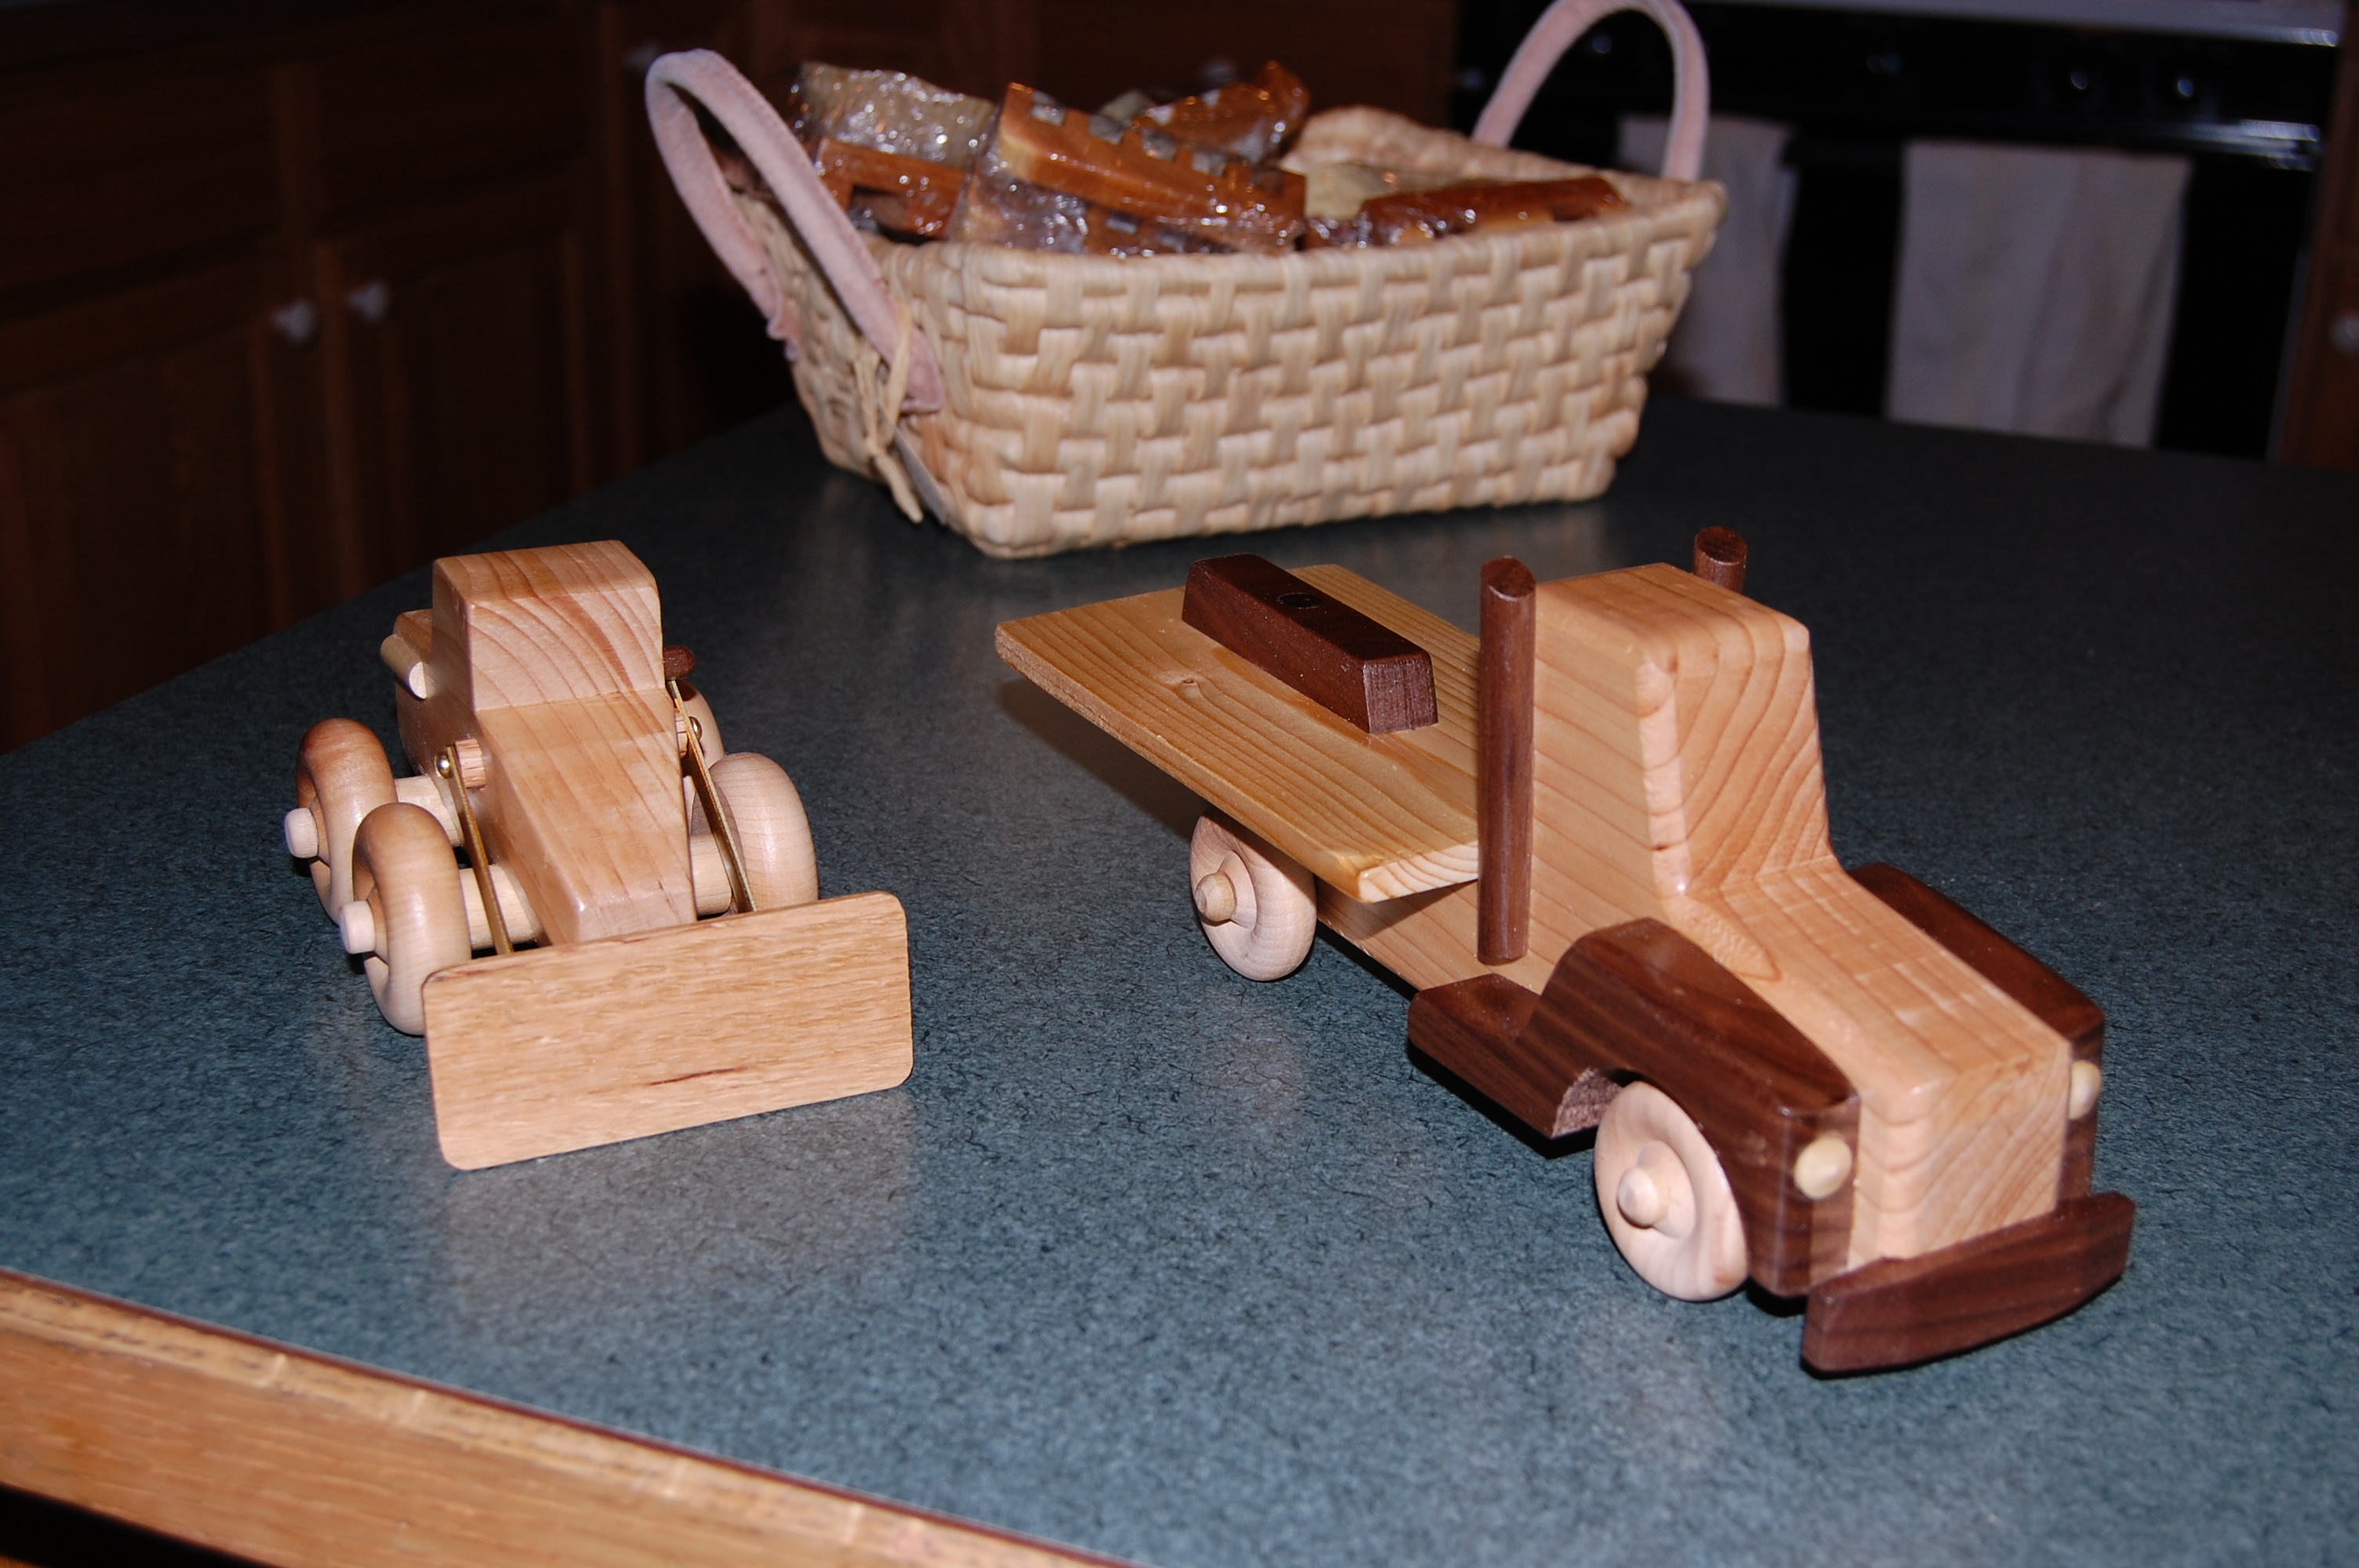 they were finished off with a rubbed tung oil finish and some felt 